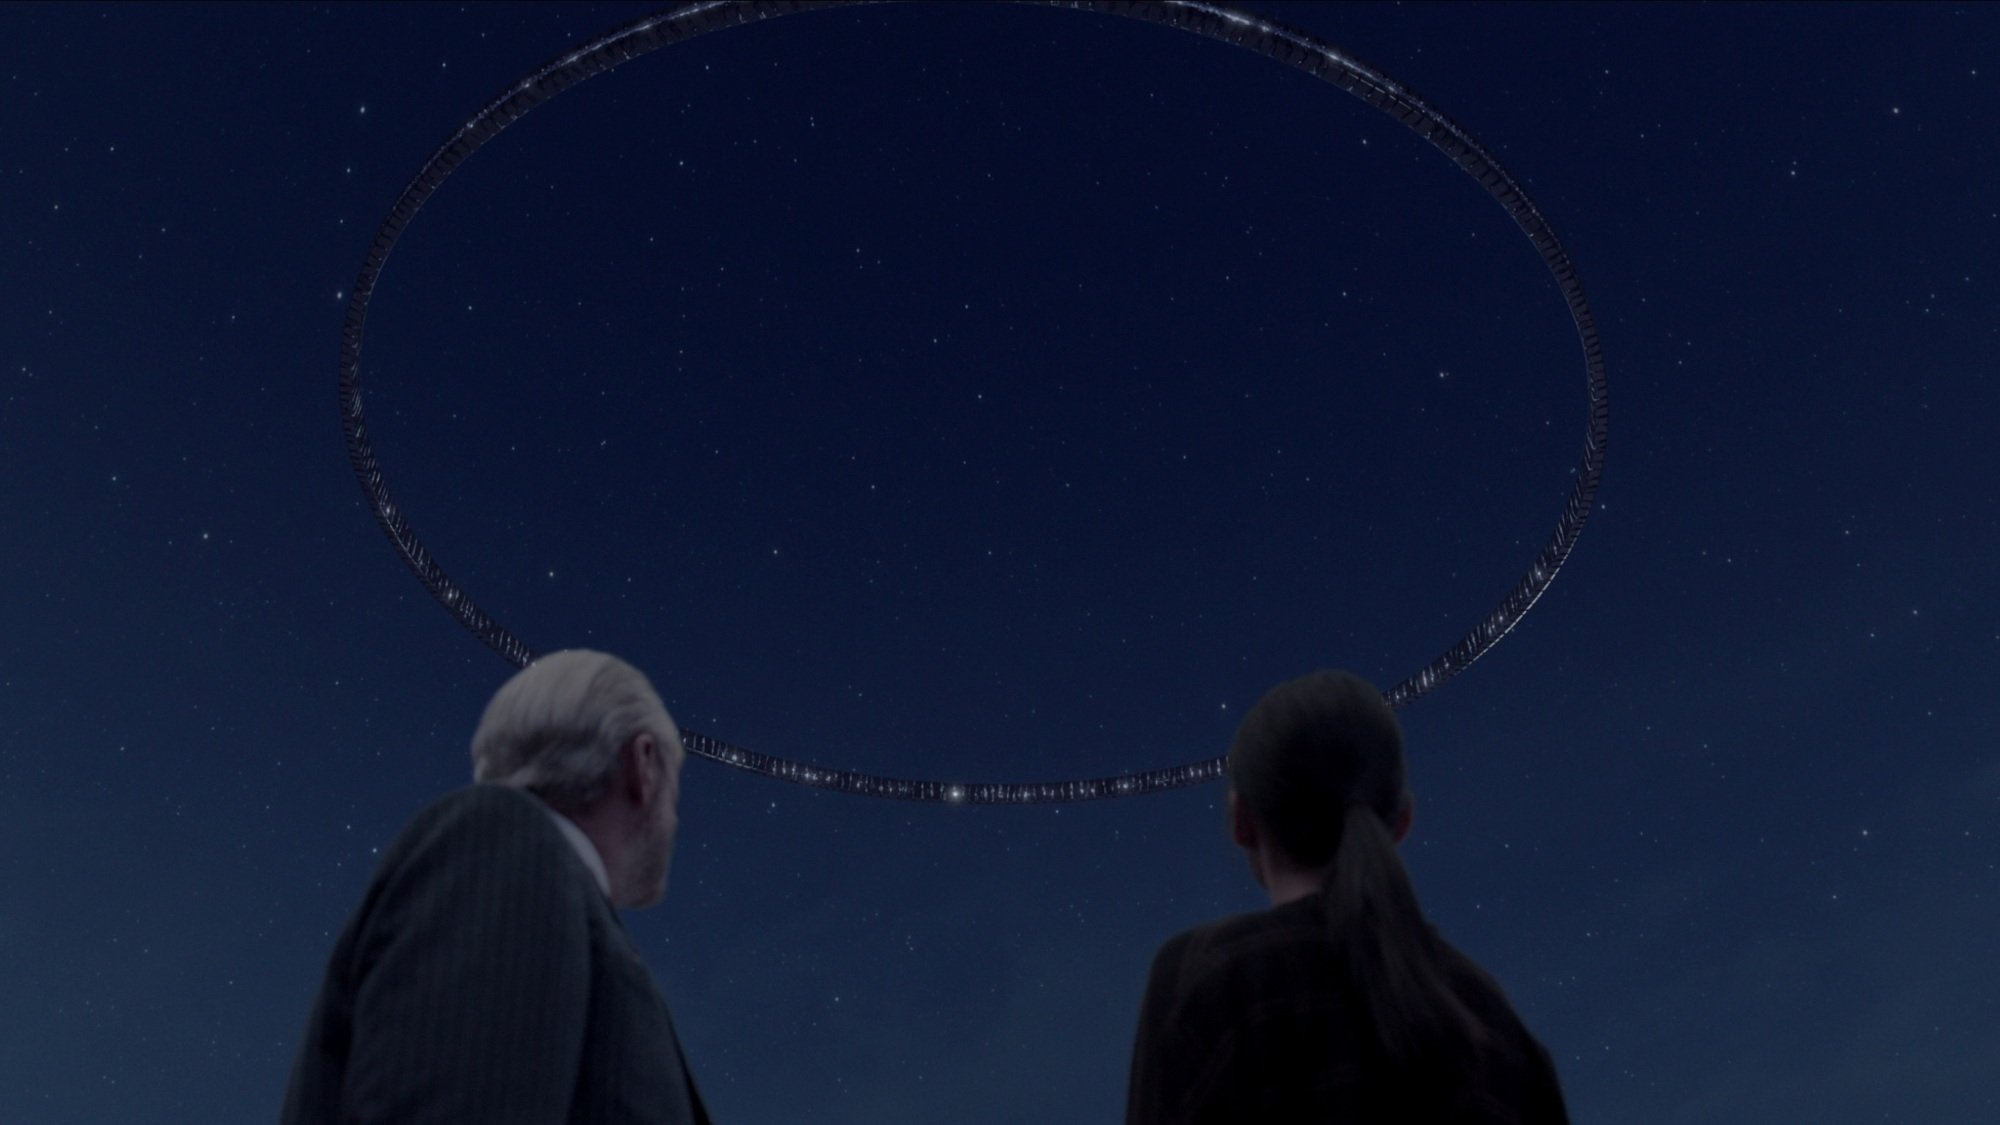 A man and woman look up at a massive alien circle in the sky.